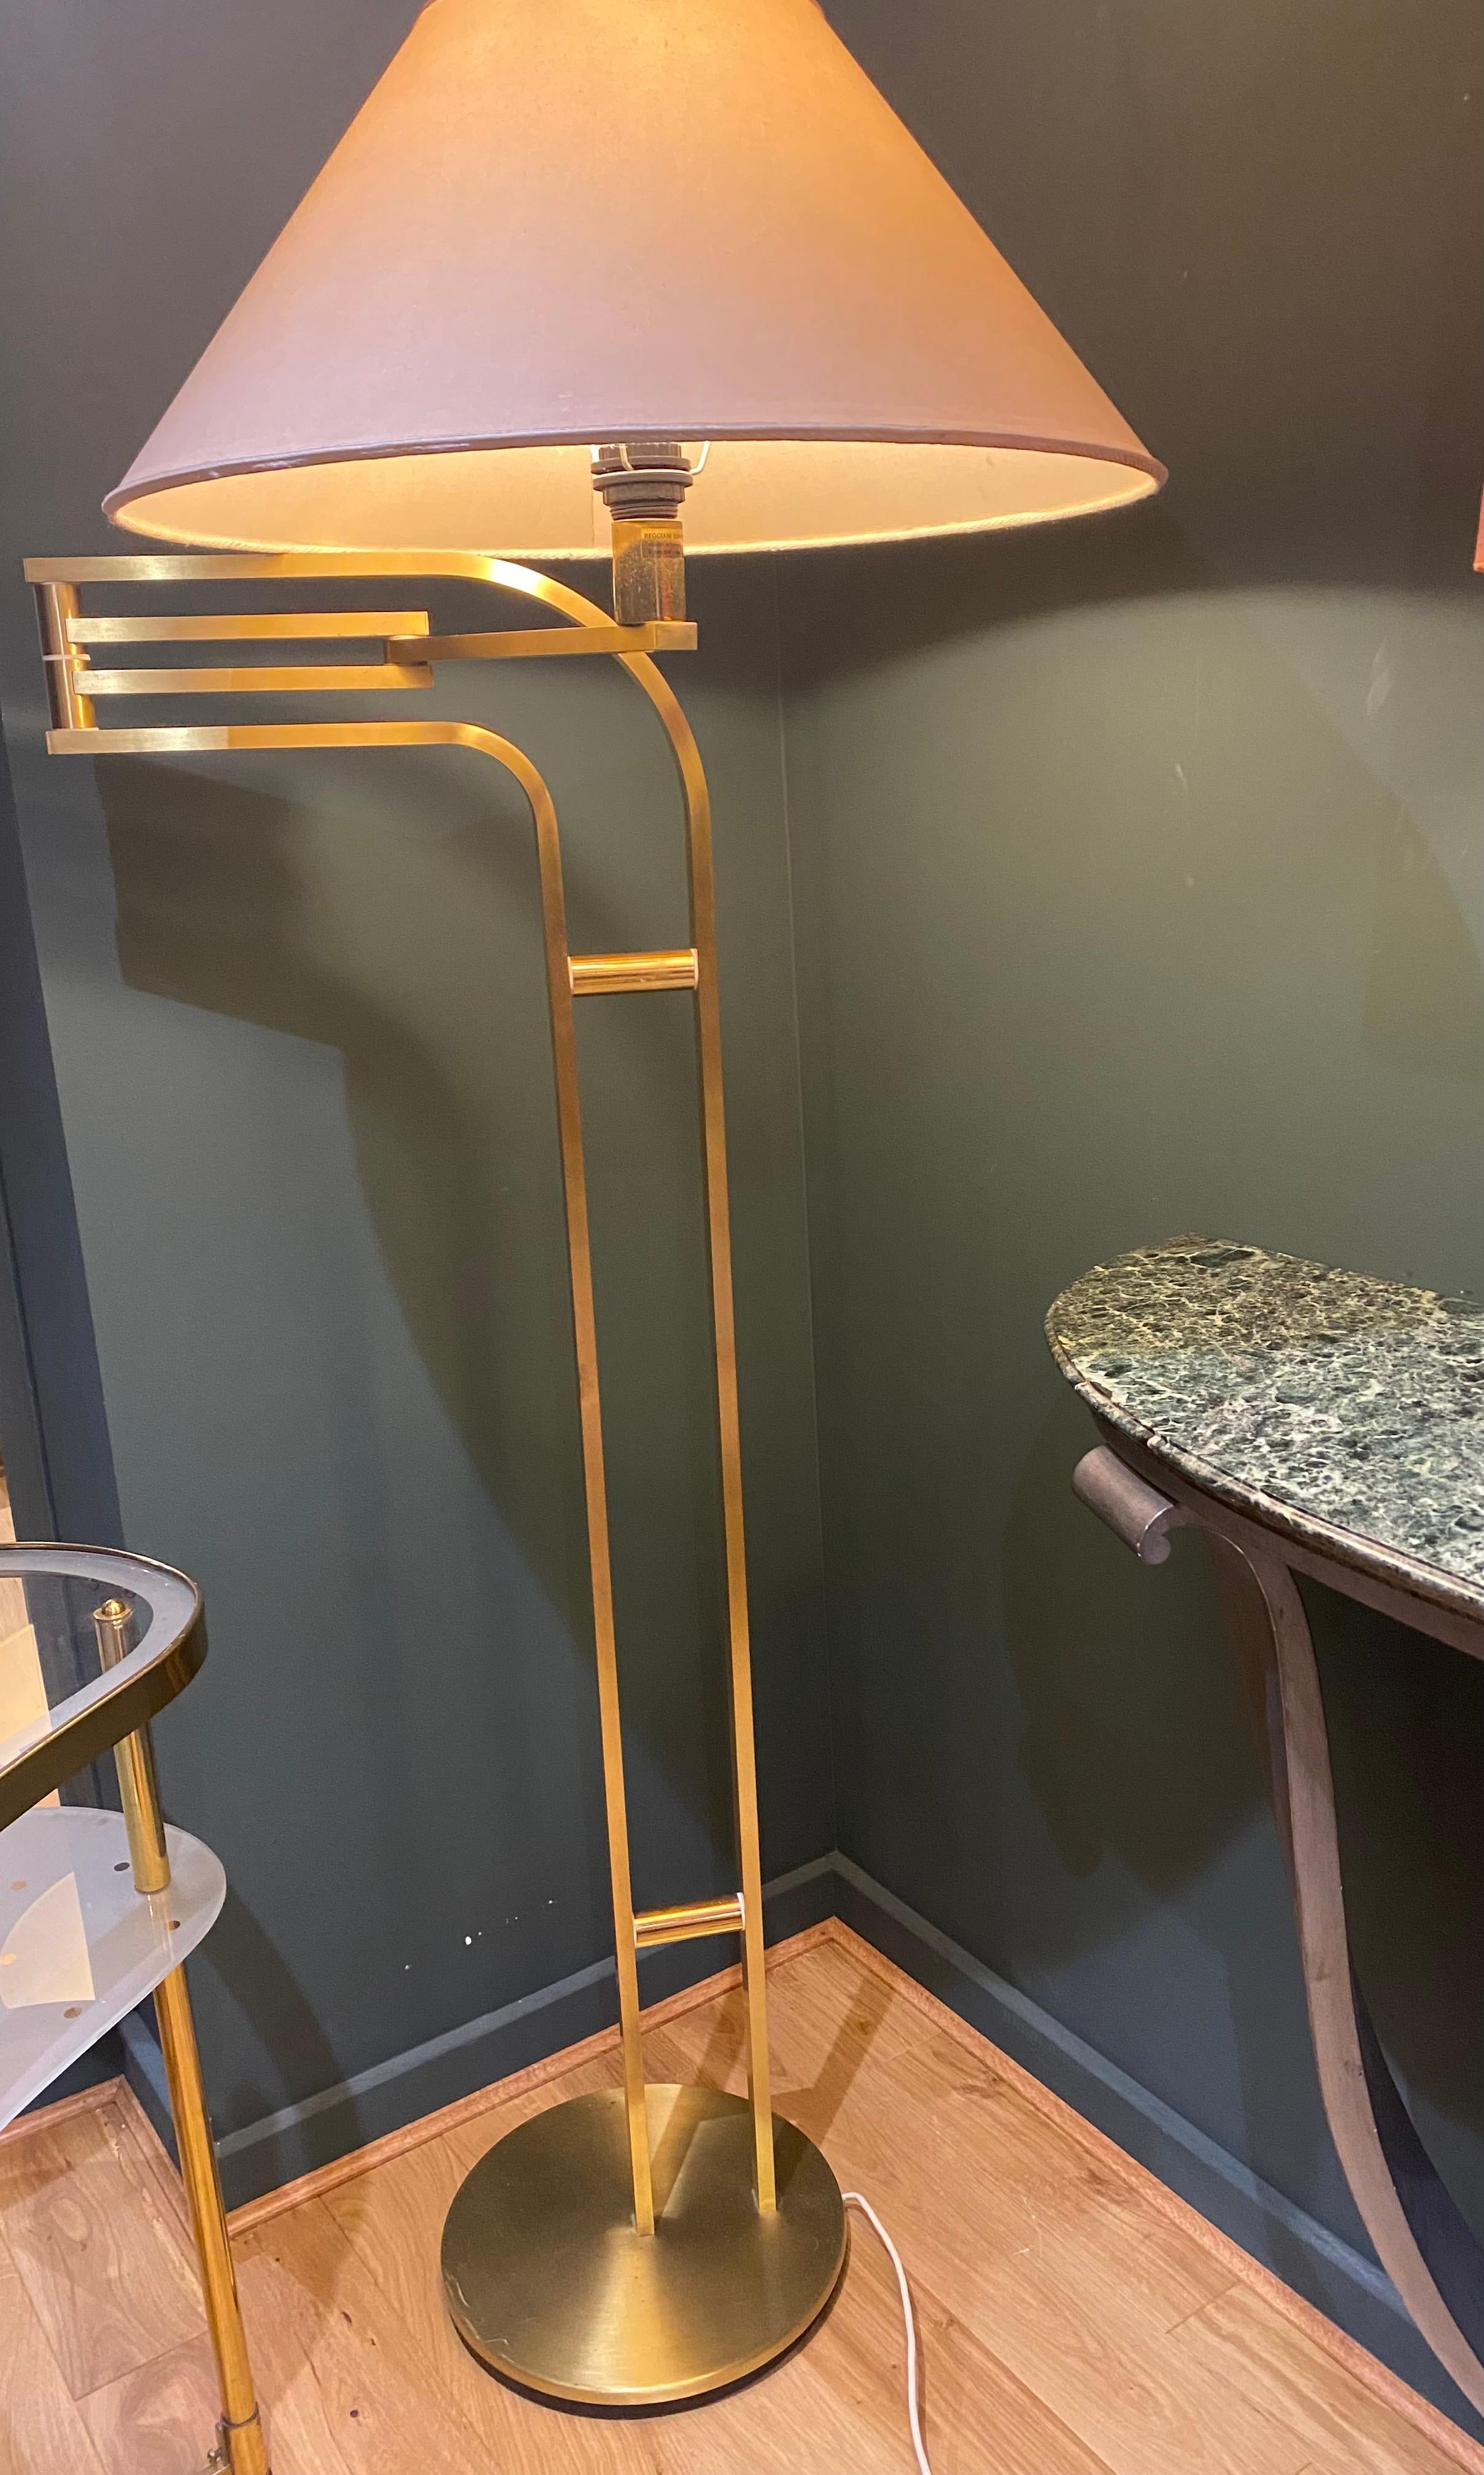 1970s Goffredo Reggiani geometric design articulated floor lamp in brass. 
Signed on the base: Reggiani Made in Italy

Dimensions: D:35cm W:50cm Extends to 97cm + shade (W:61cm) H:145cm+shade height : 30cm 